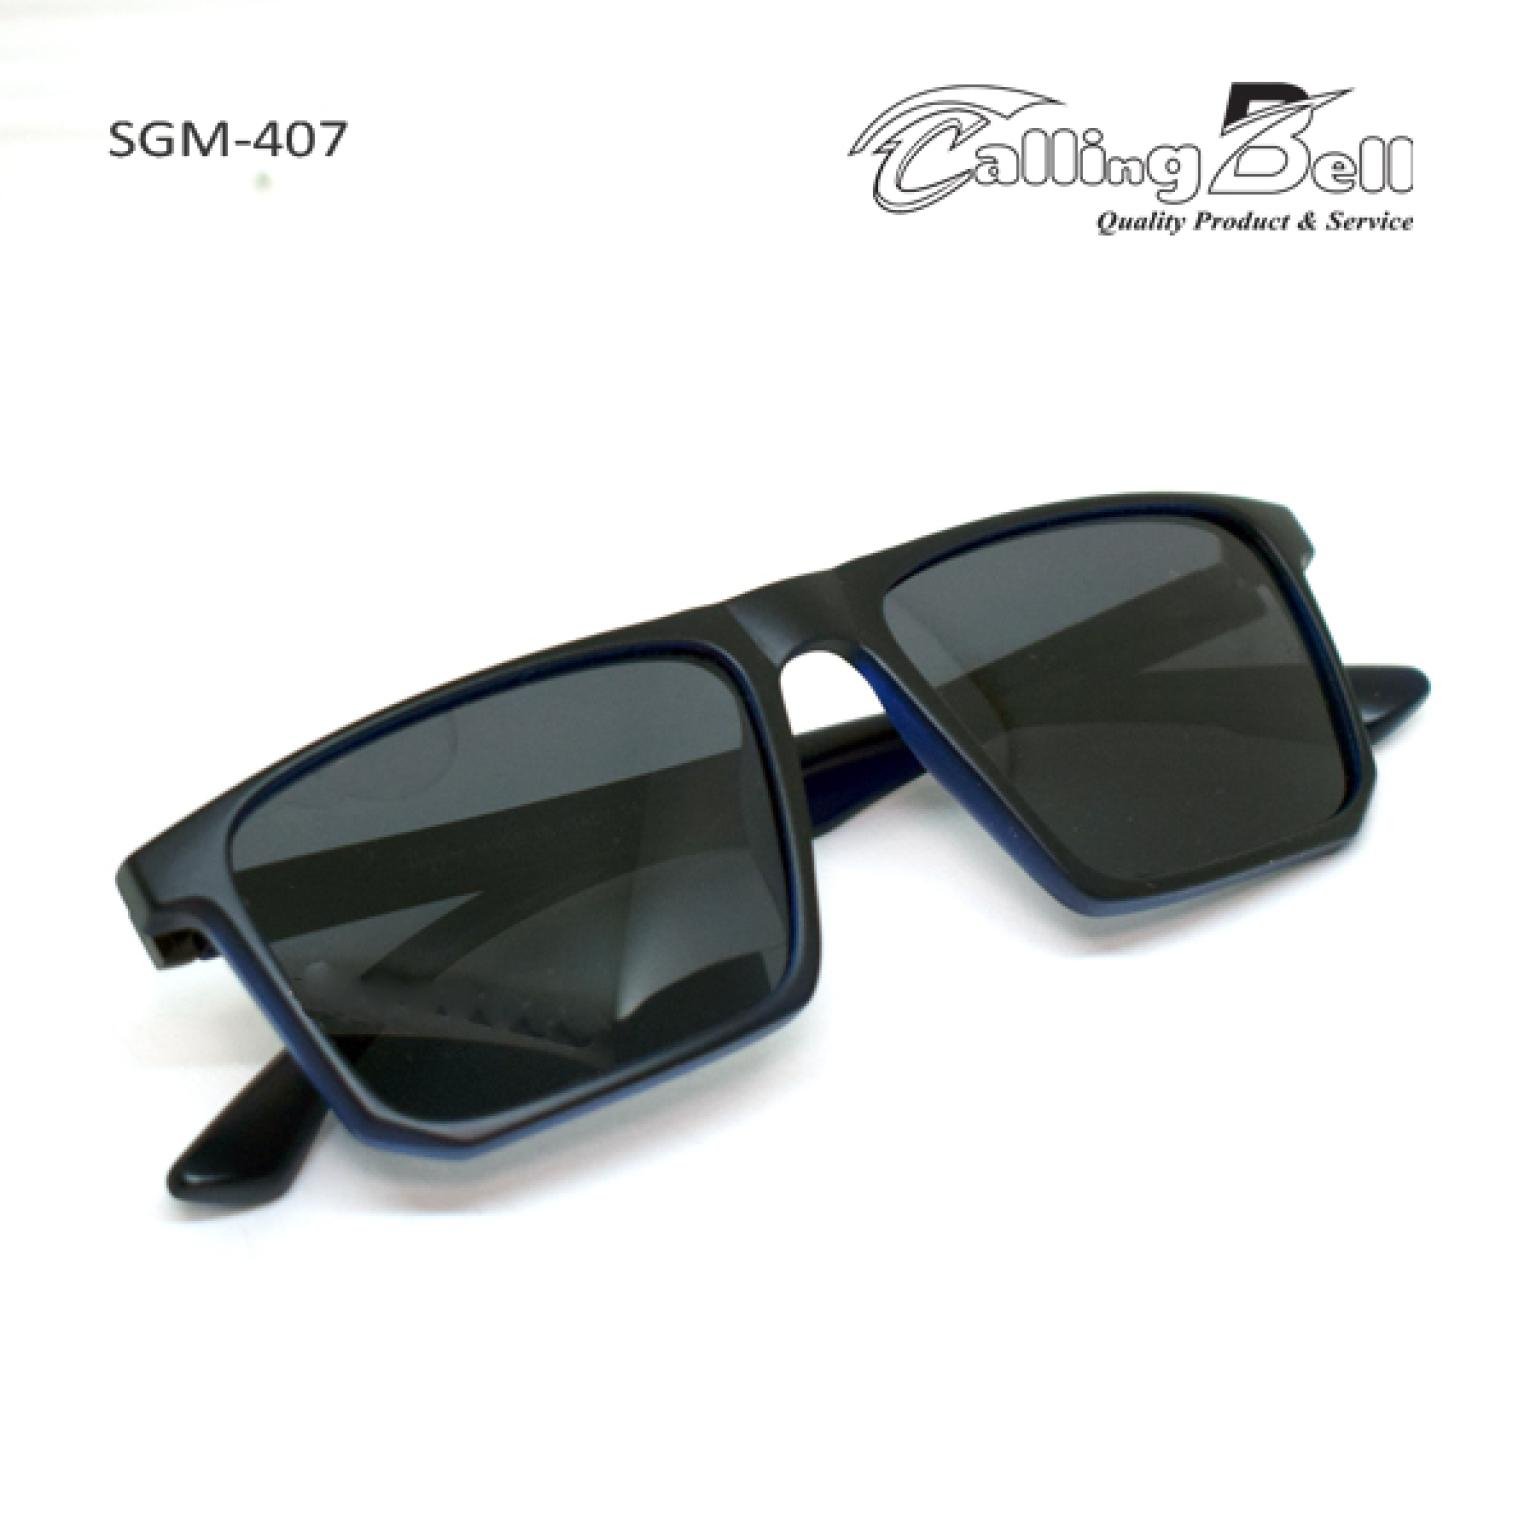 Classic Wayfarer Style Polarized Sunglasses Best For Bike Driving With Fashion